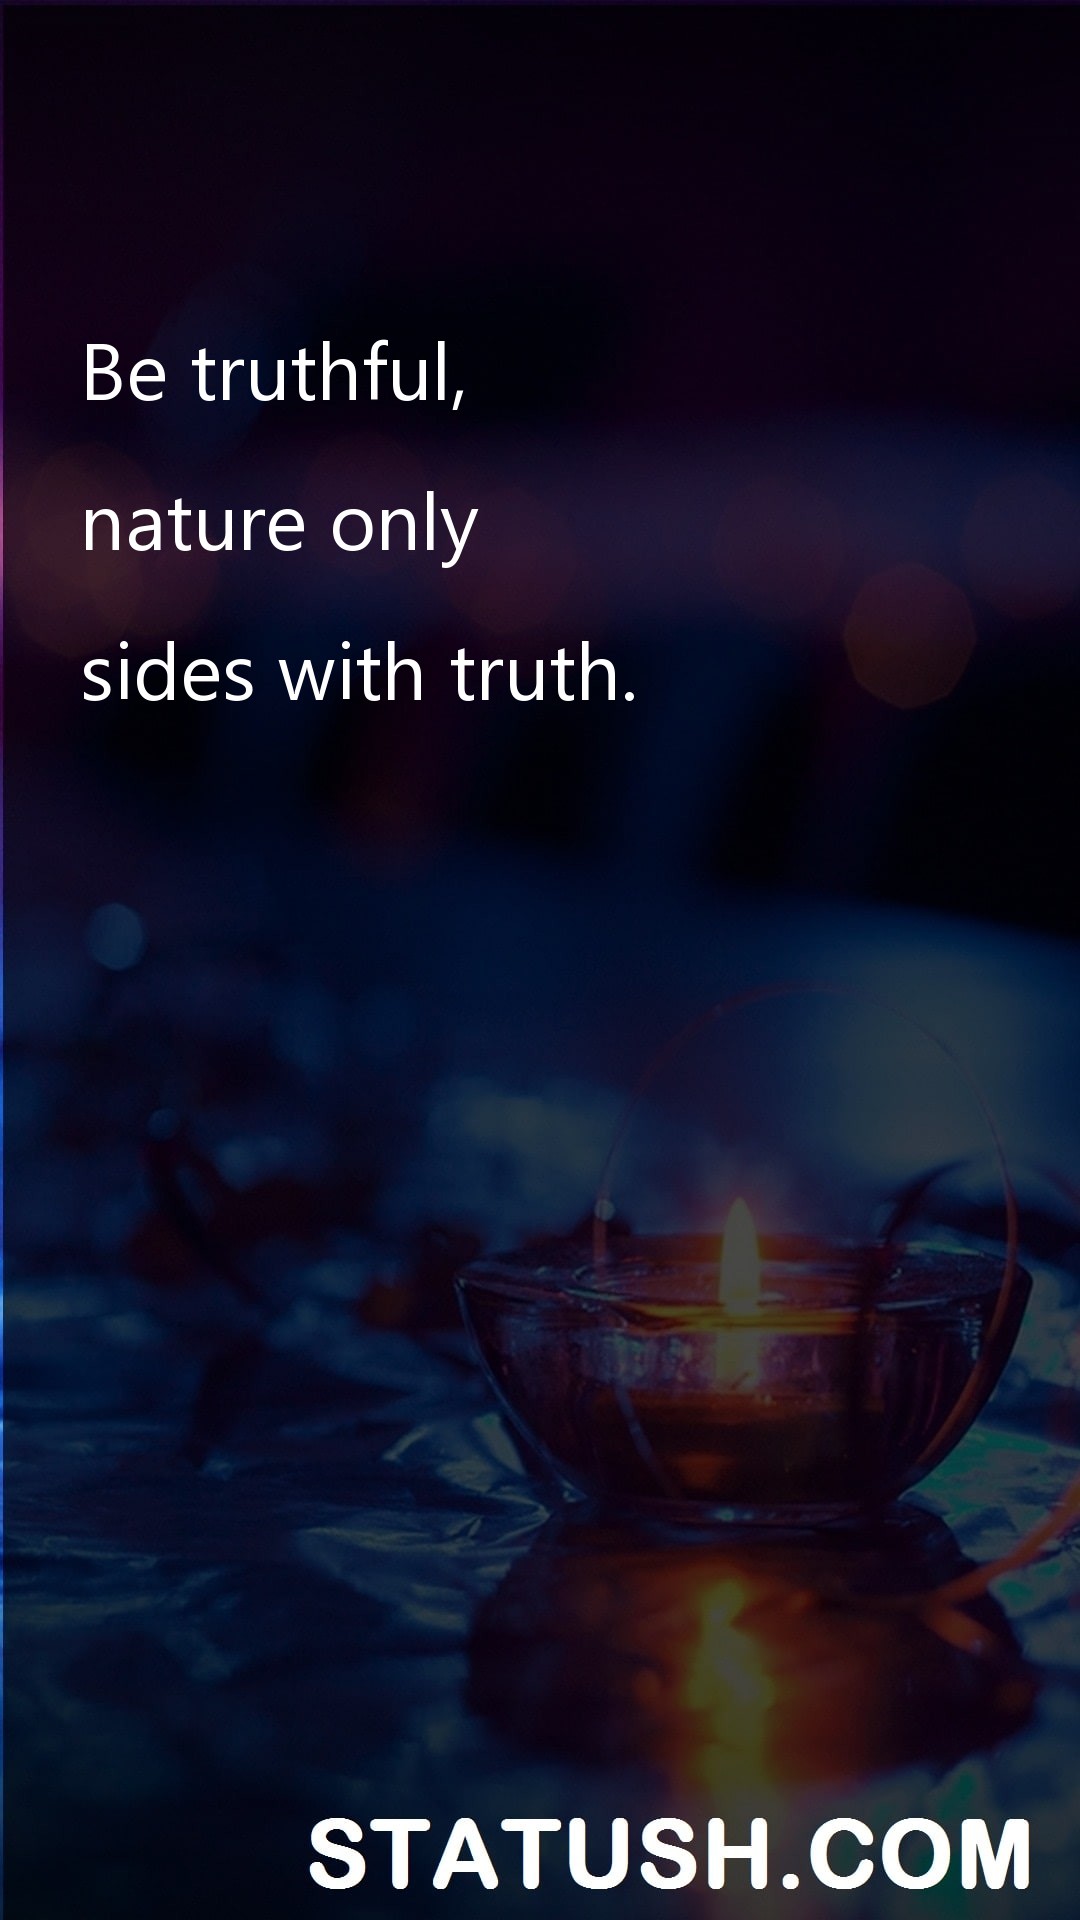 Be truthful - Truth Quotes at statush.com